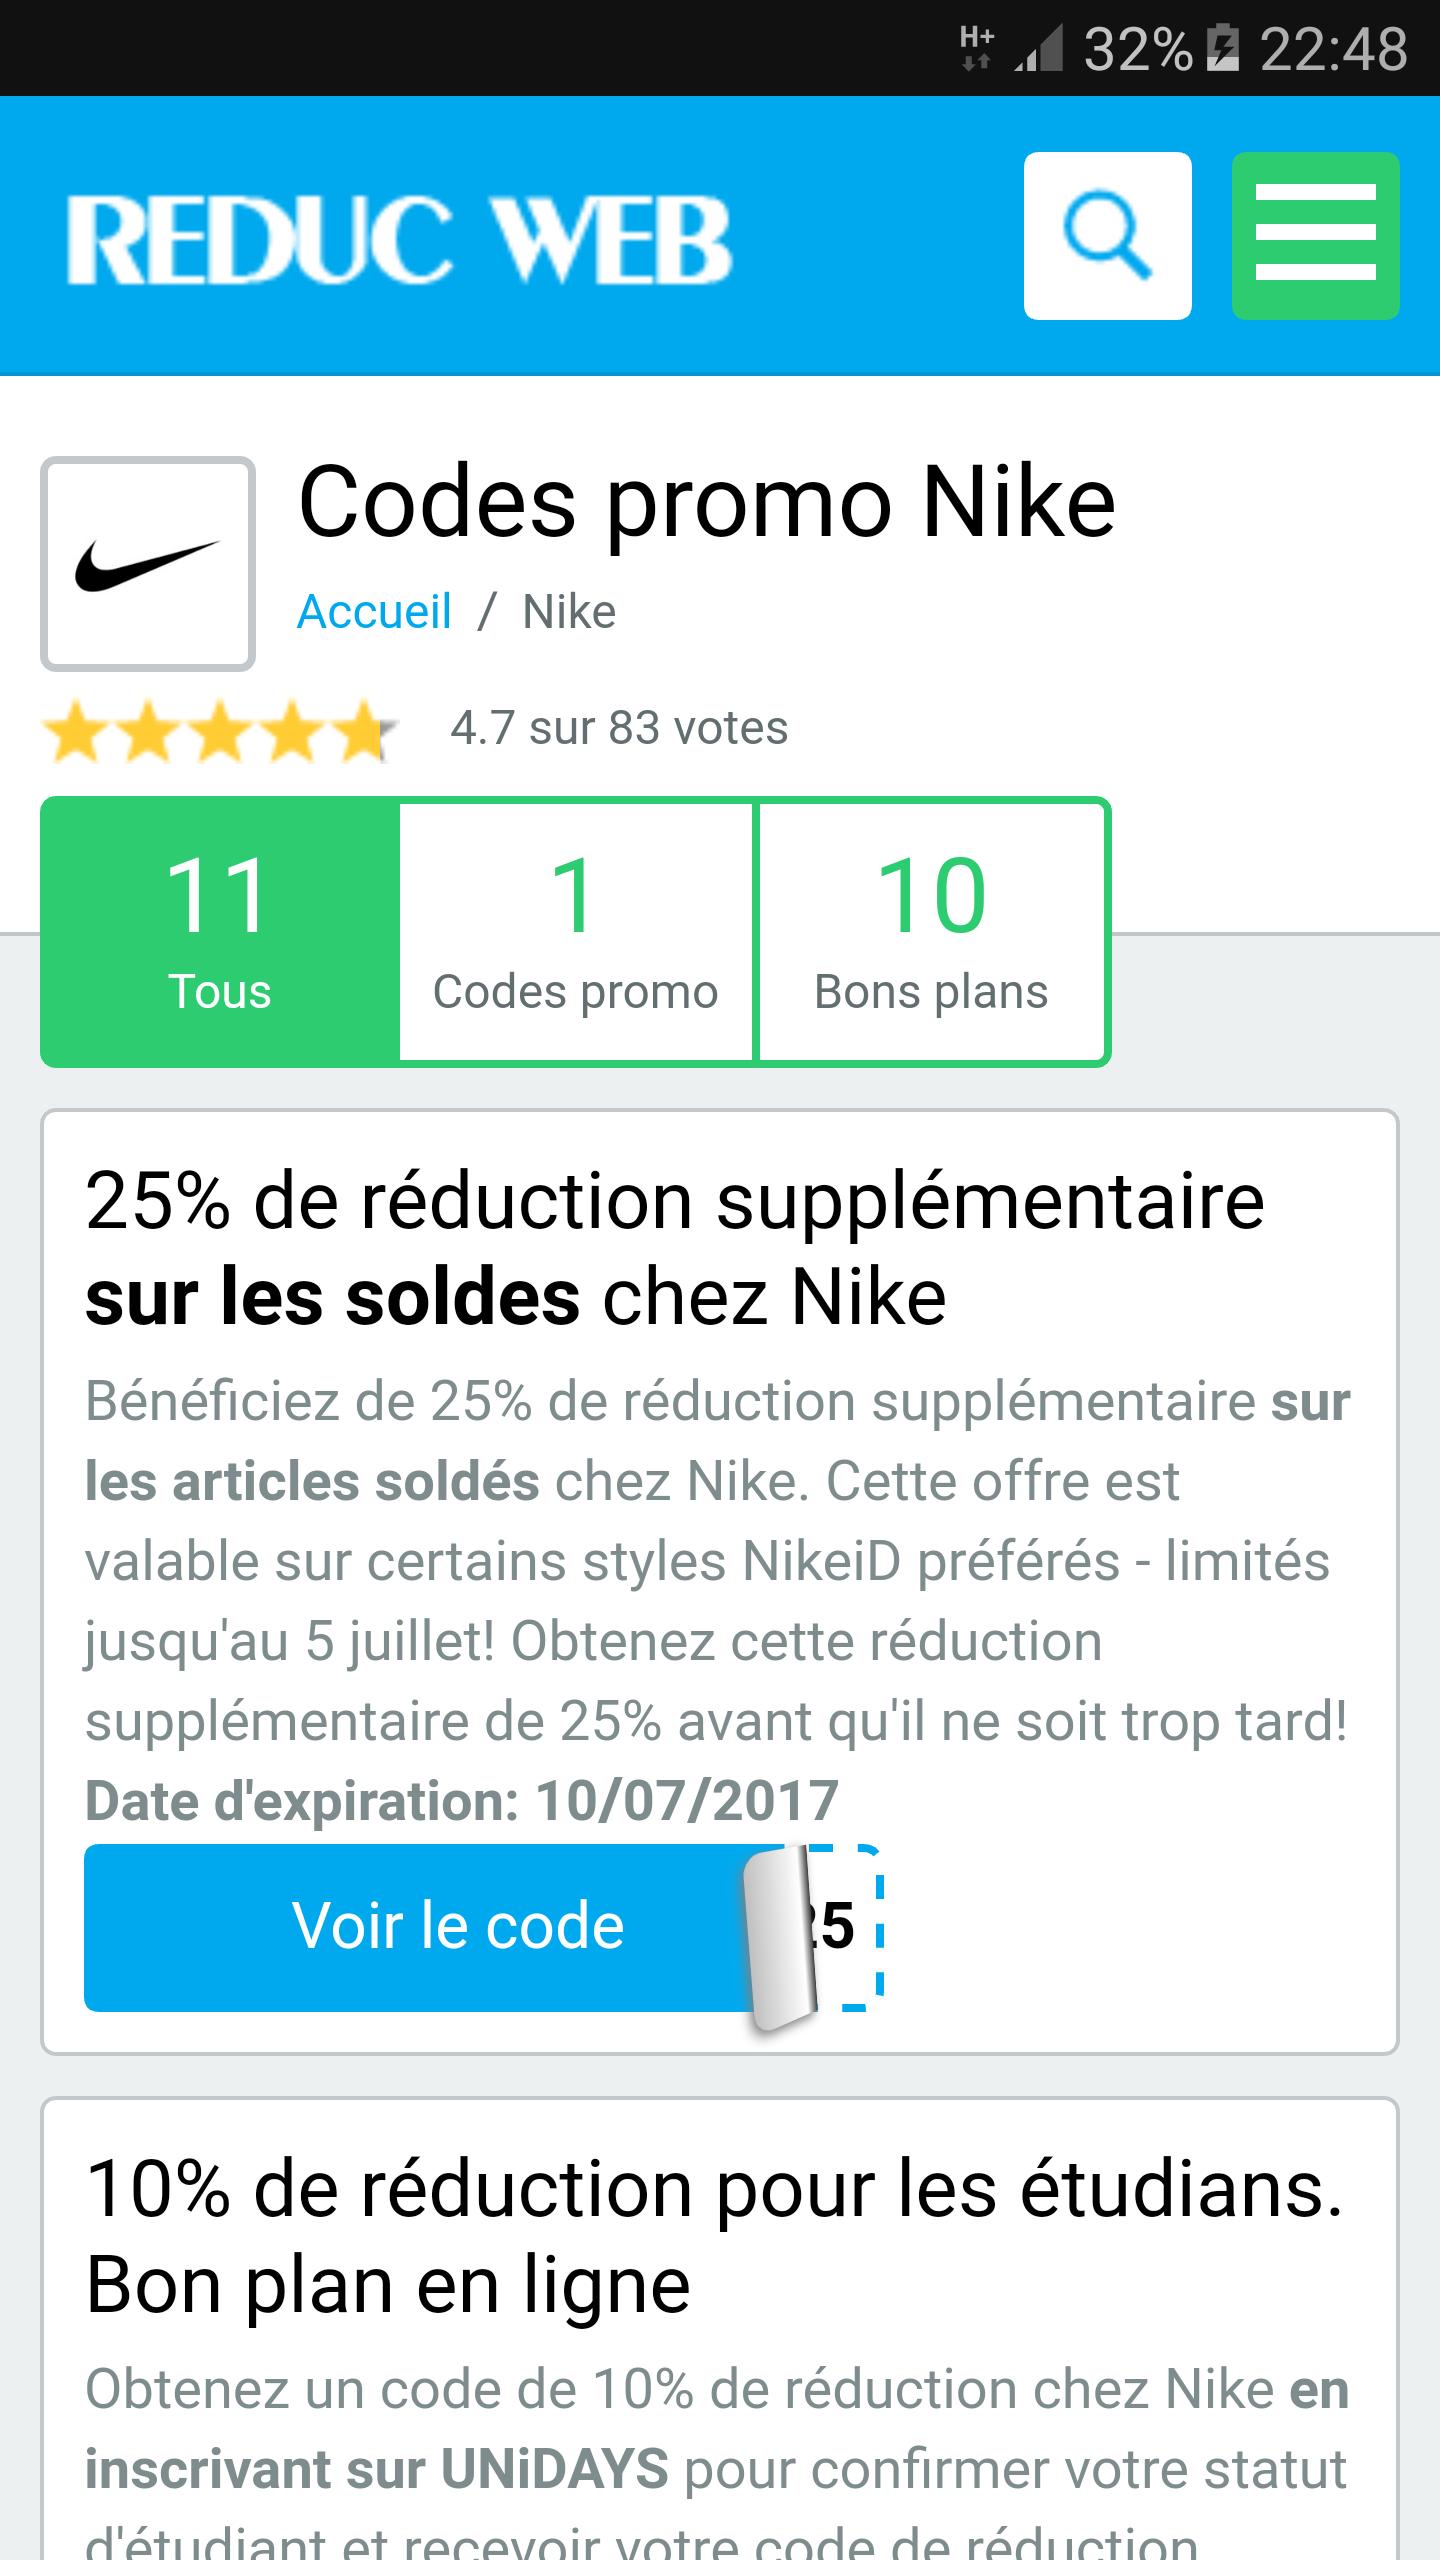 Code promo Nike for Android - APK Download